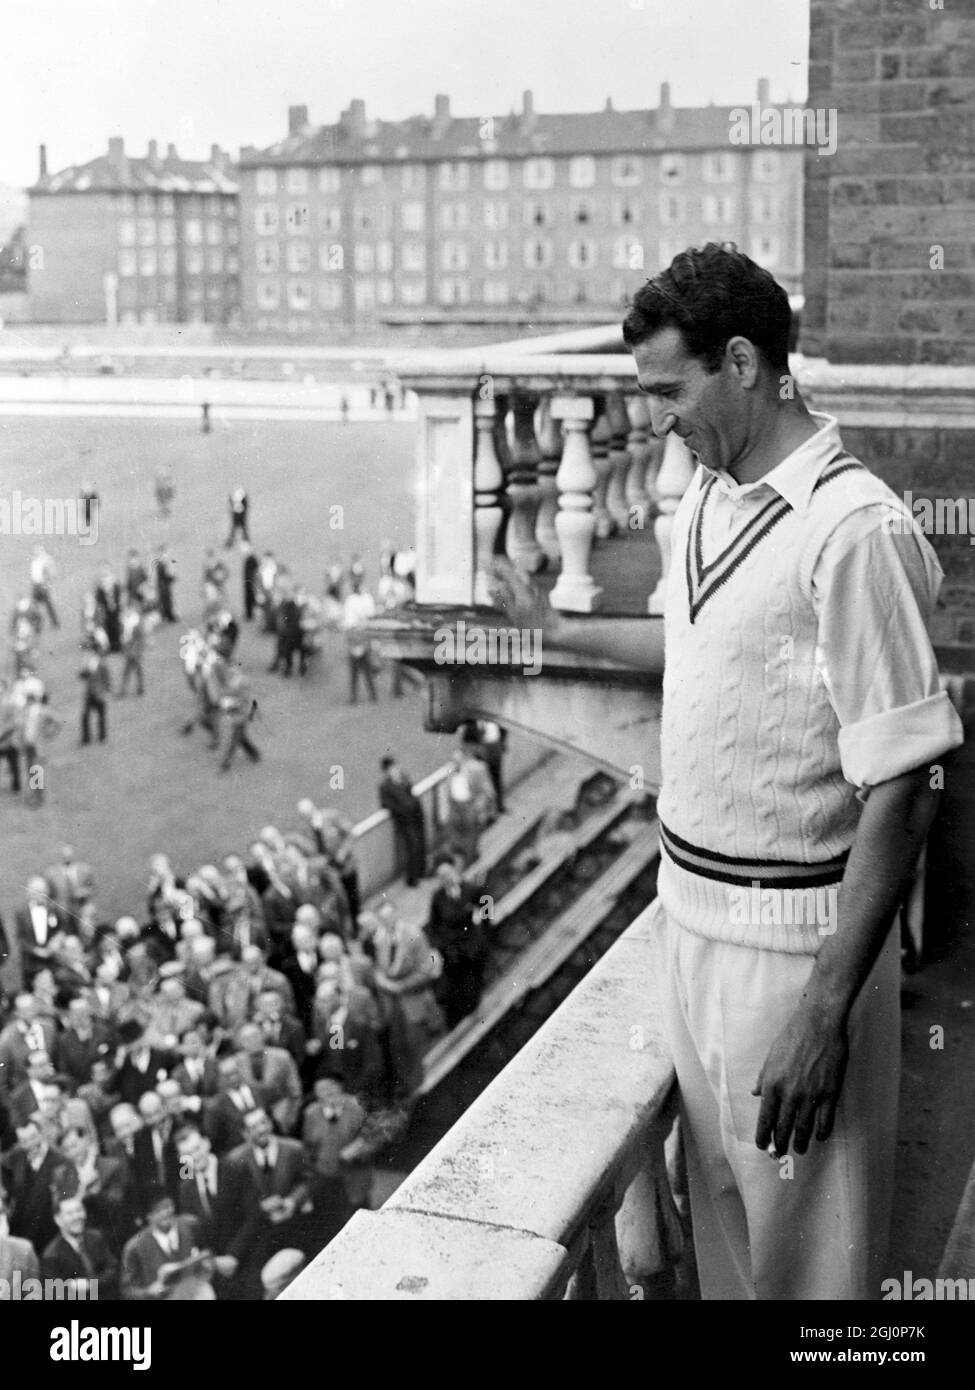 London ; The Pakistan skipper , AH Kardar , smilingly acknowledges the cheers of the crowd after his team ' s victory in the fourth and final Test match against England , held at the Oval . They won by 24 runs . 17 August 1954 Stock Photo